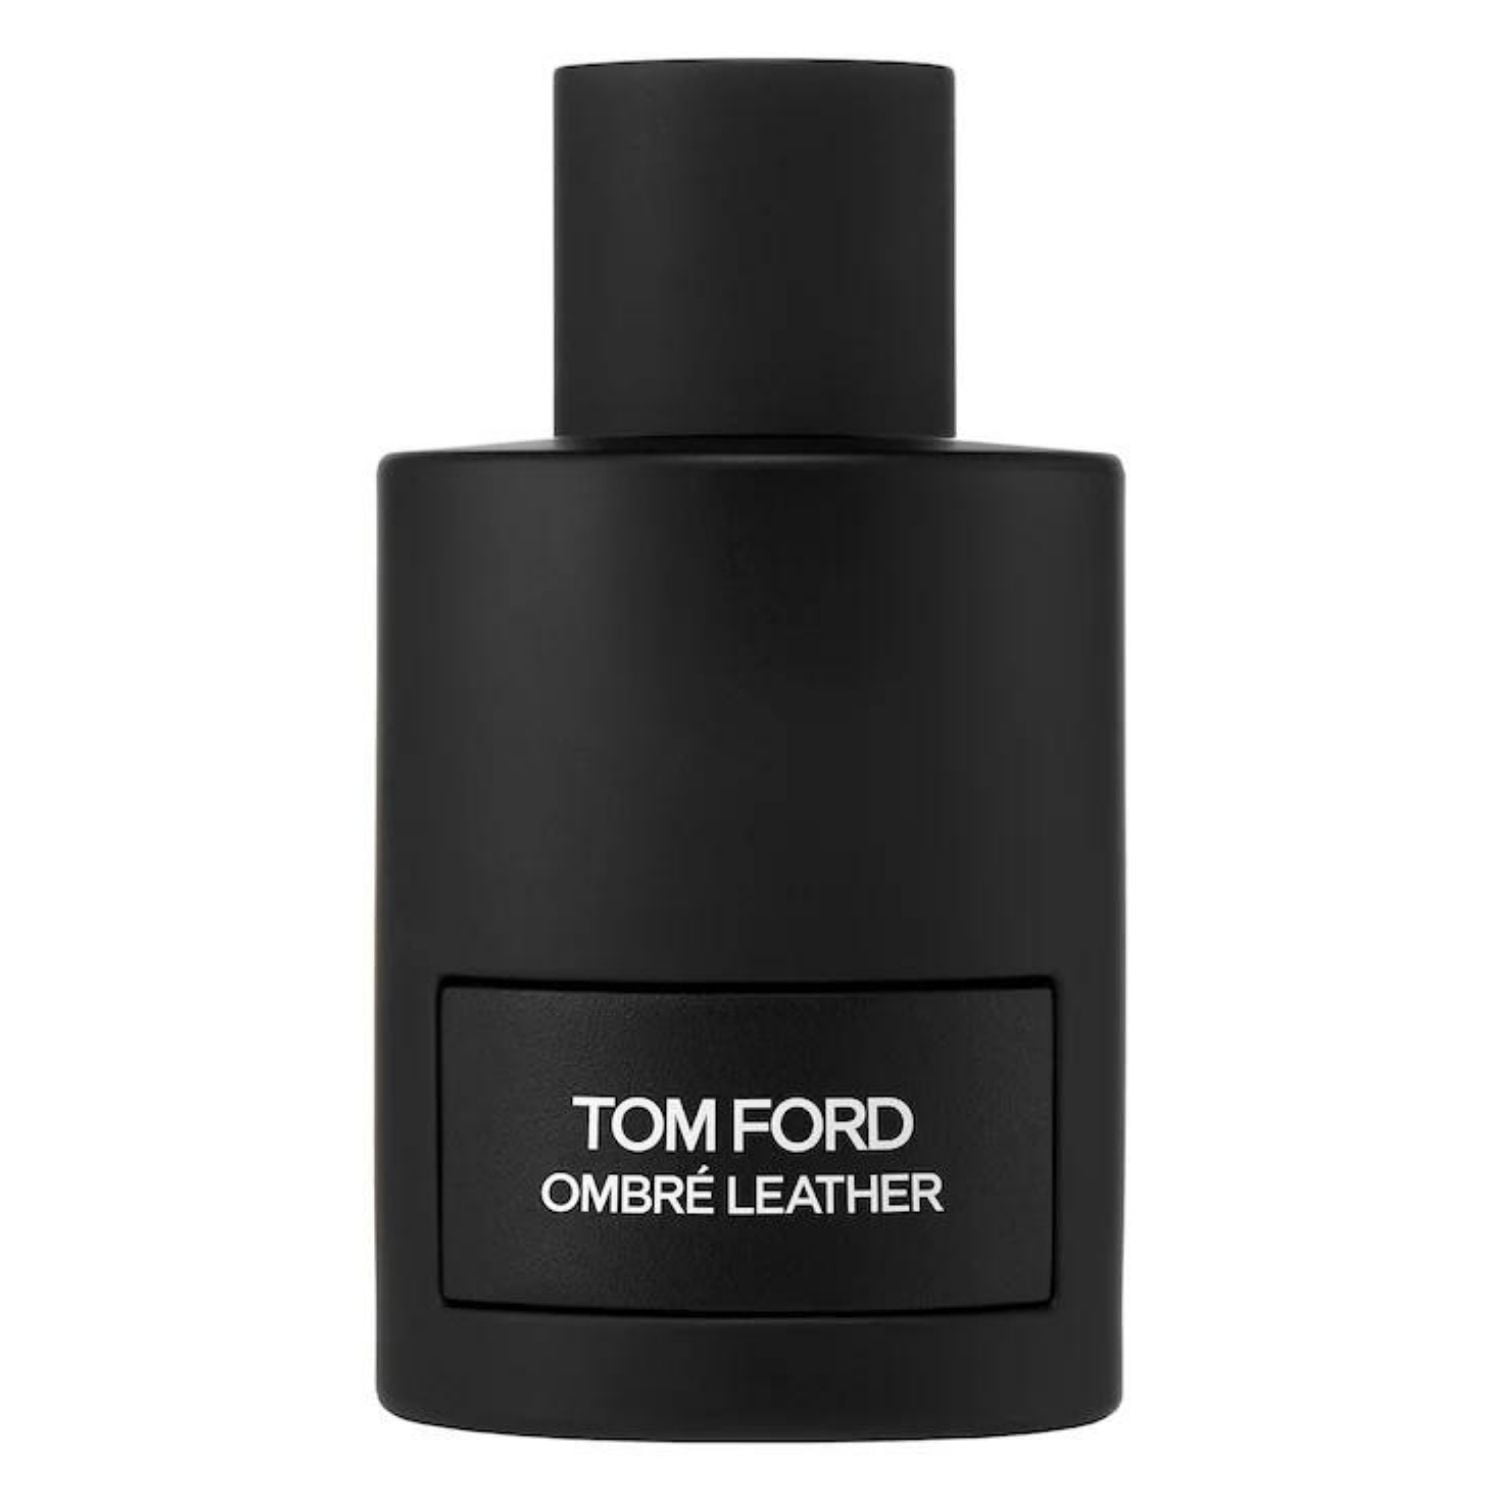 tom ford ombre